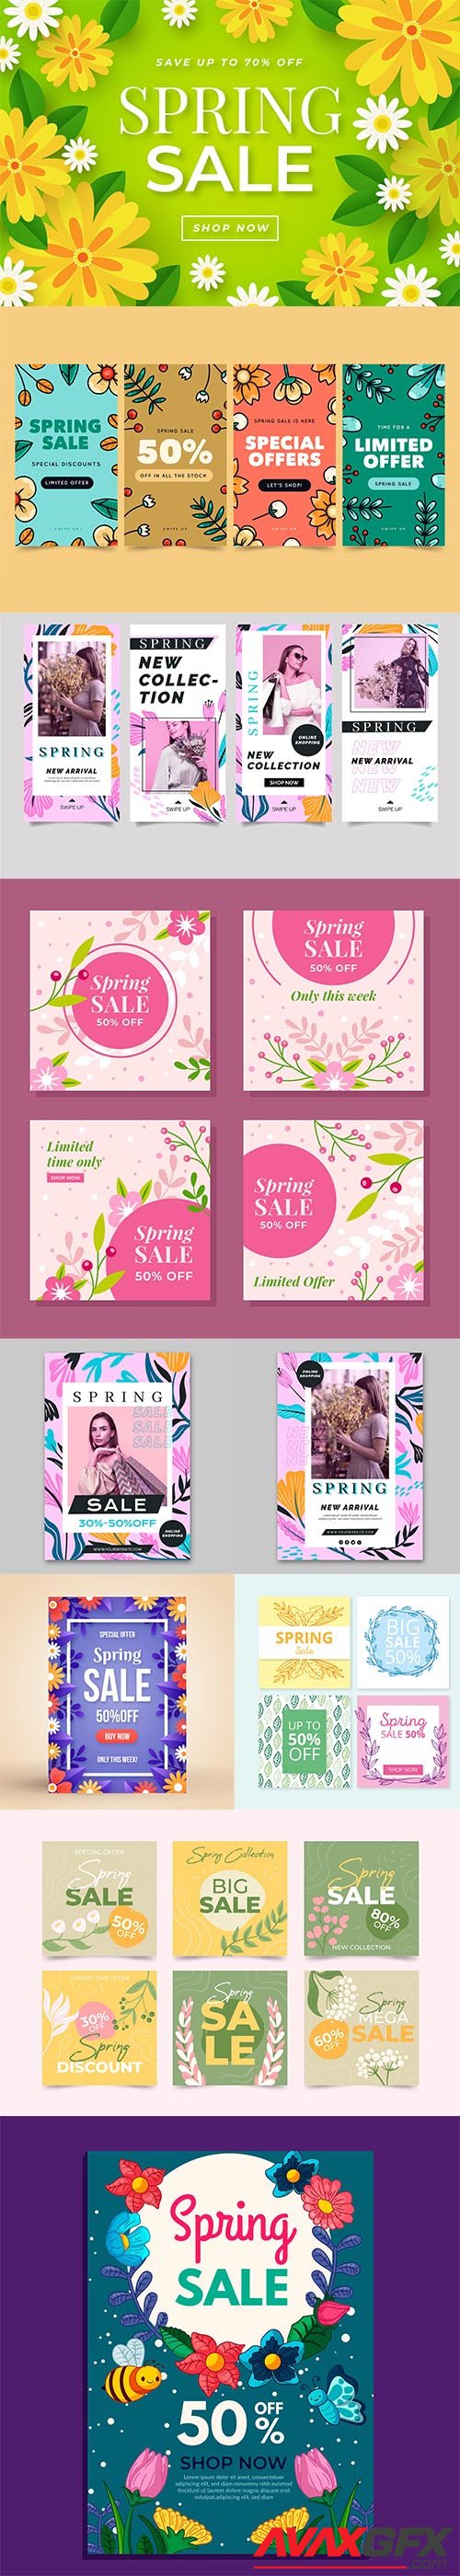 Hand-drawn Spring Sale Vector Collection vol 3